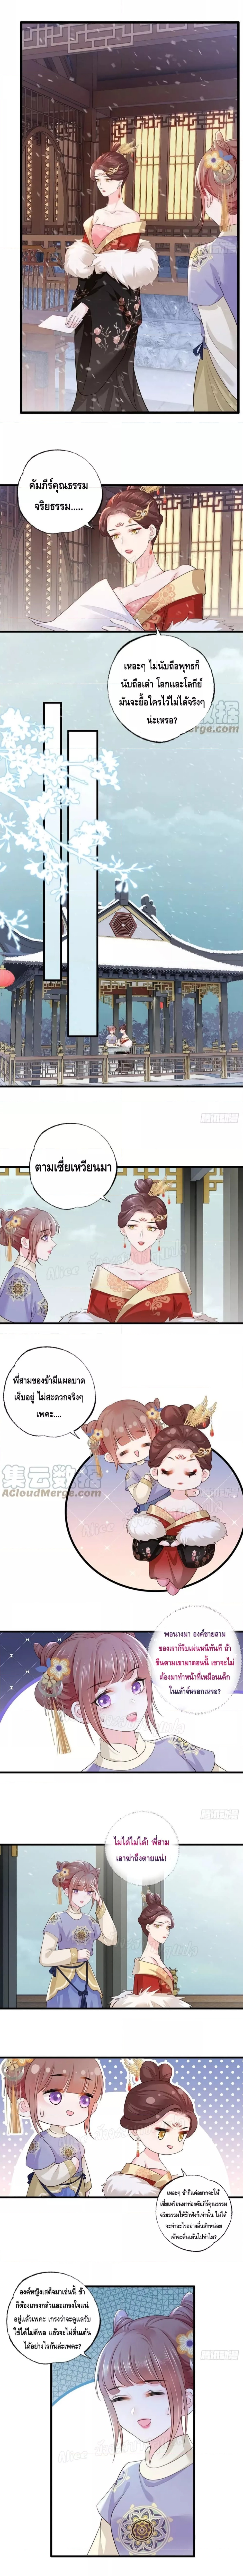 The Pampered Regent of The Richest Woman เธเธฒเธฃเธเธฅเธฑเธเธกเธฒเธเธญเธเธเธธเธ“เธซเธเธนเธเธนเนเธฃเนเธณเธฃเธงเธขเธ—เธตเนเธชเธธเธ” เธ•เธญเธเธ—เธตเน 128 (3)